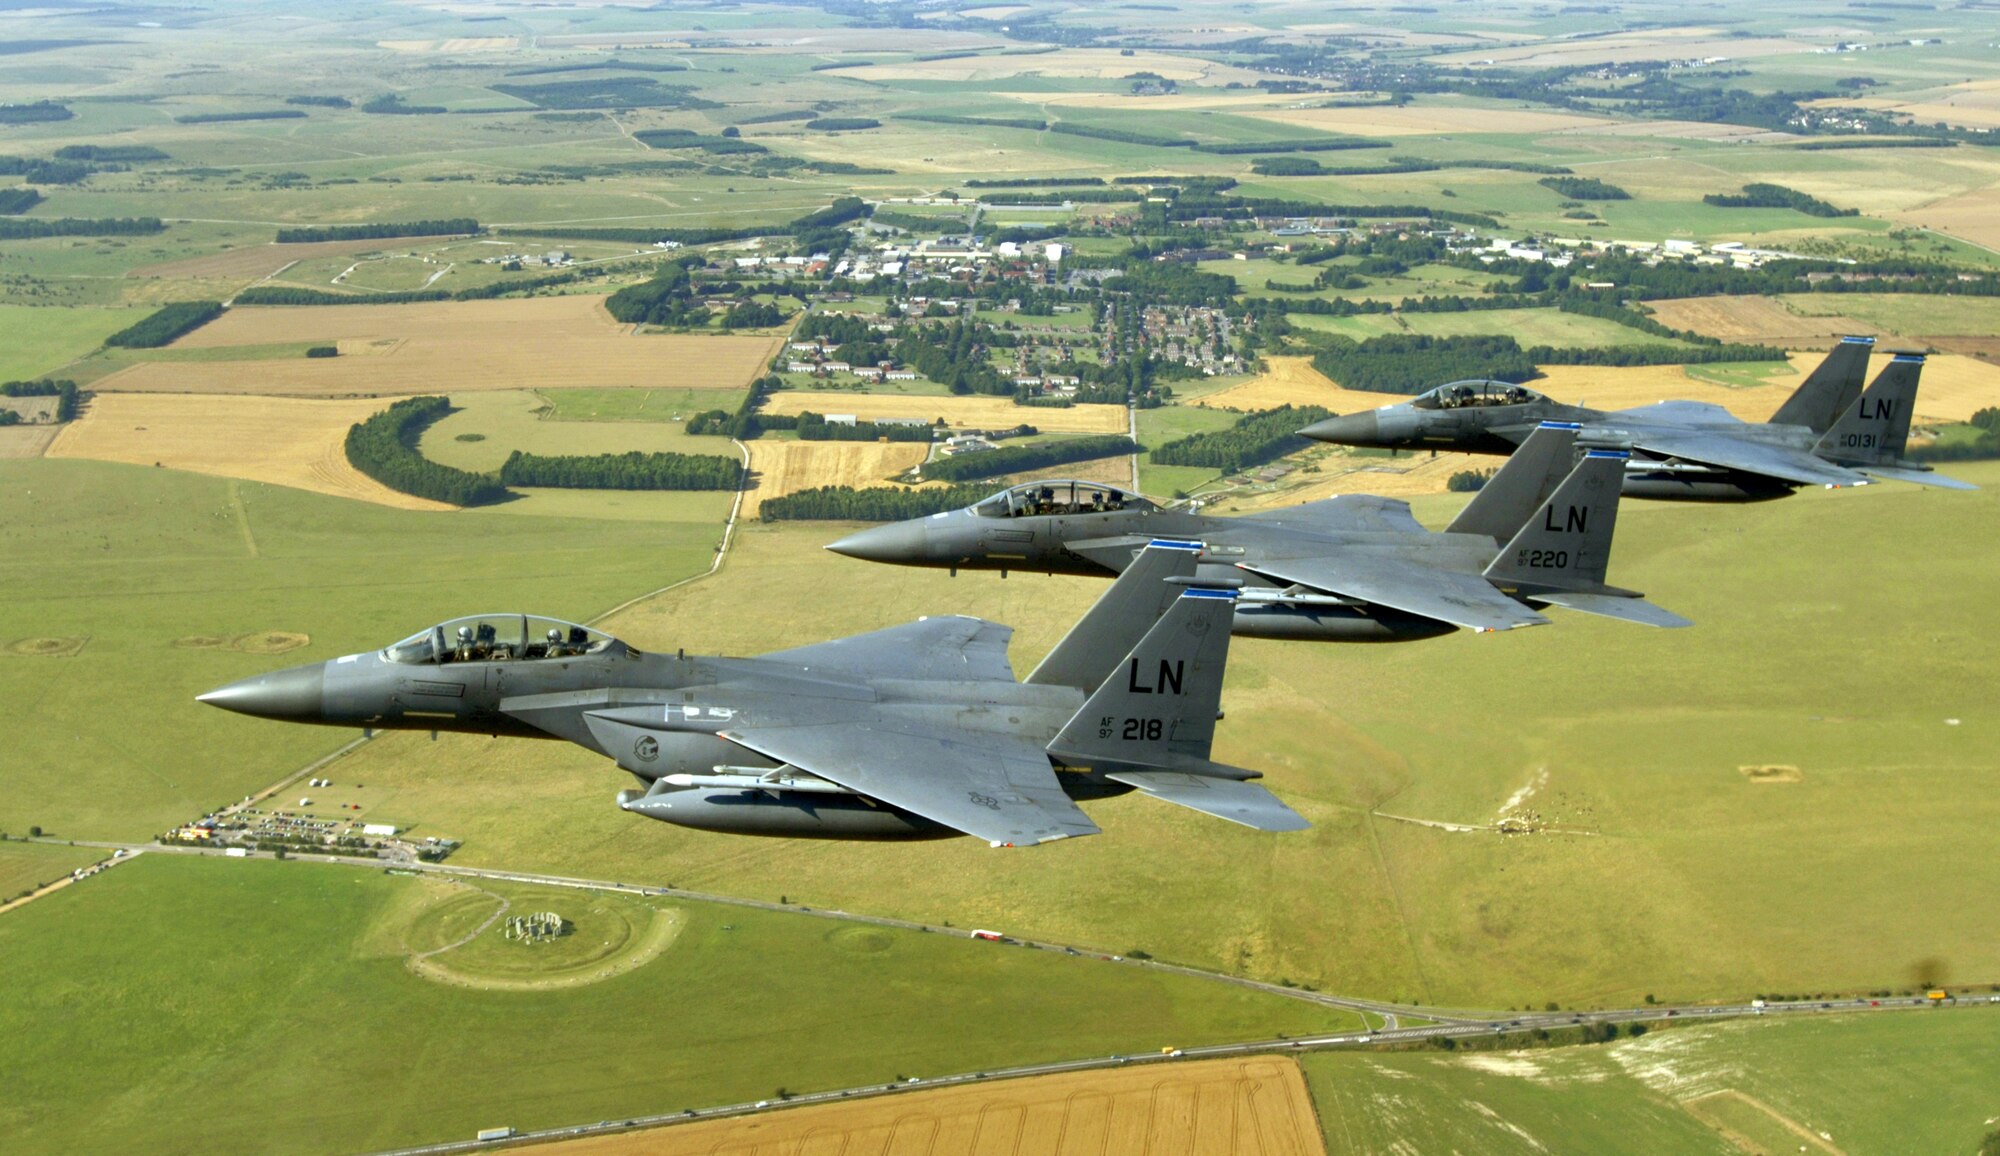 A trio of F-15E Strike Eagles from the 492nd Fighter Squadron at Royal Air Force Lakenheath, England, flies past Stonehenge on Thursday, Aug. 3. The fighters were on their way to an area off the southwestern coast of England to practice basic surface attack techniques.  (U.S. Air Force photo/Master Sgt. Lance Cheung)